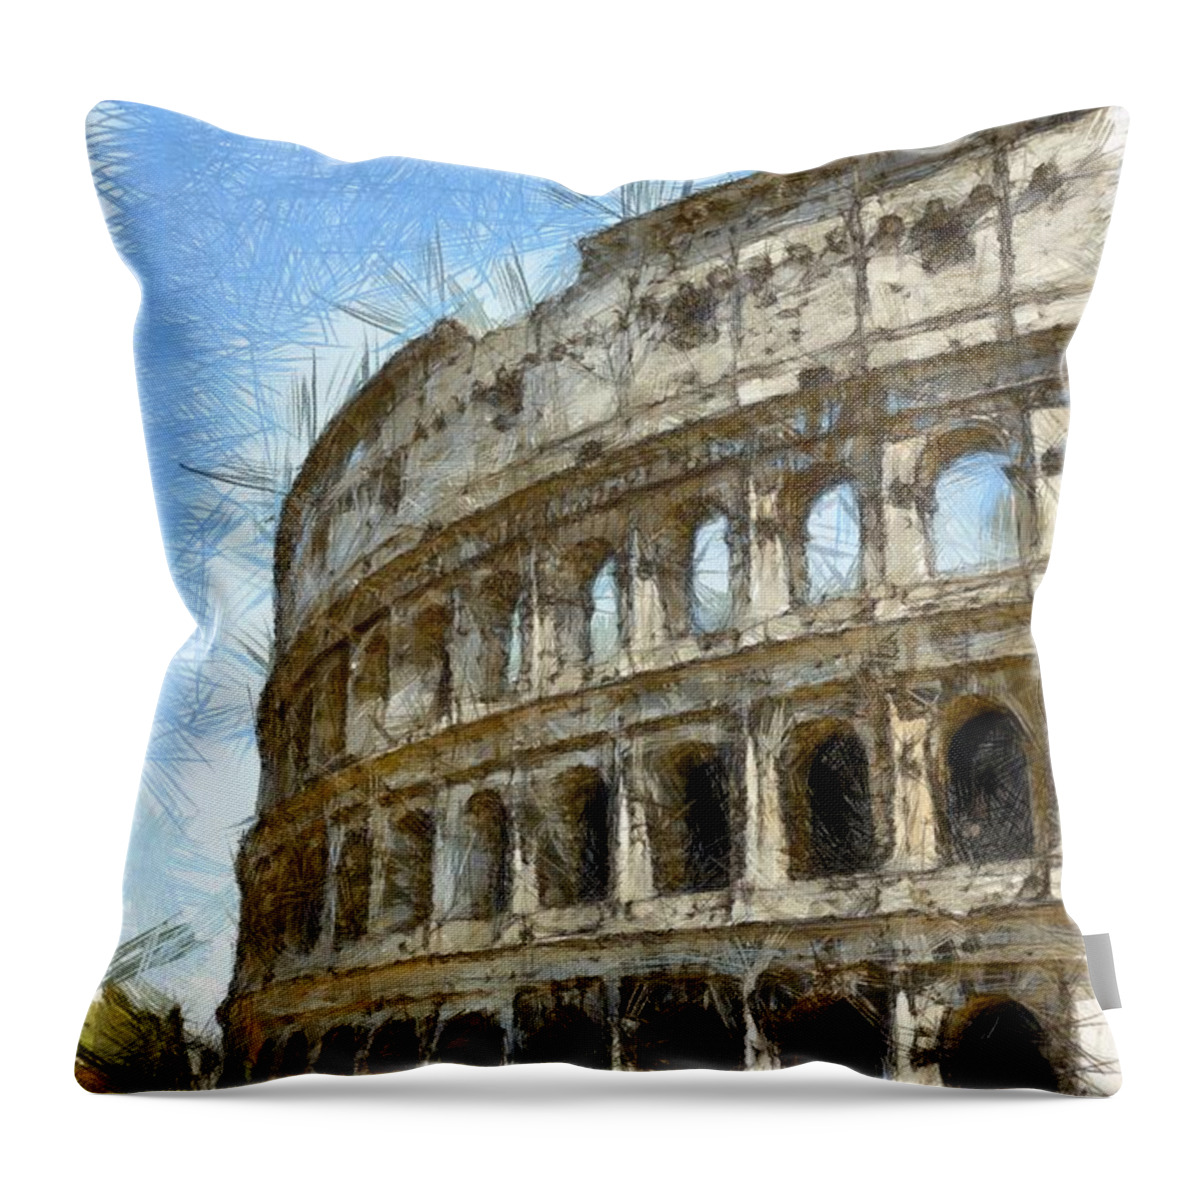 Colored Pencil Throw Pillow featuring the photograph Colosseum or Coliseum Pencil by Edward Fielding